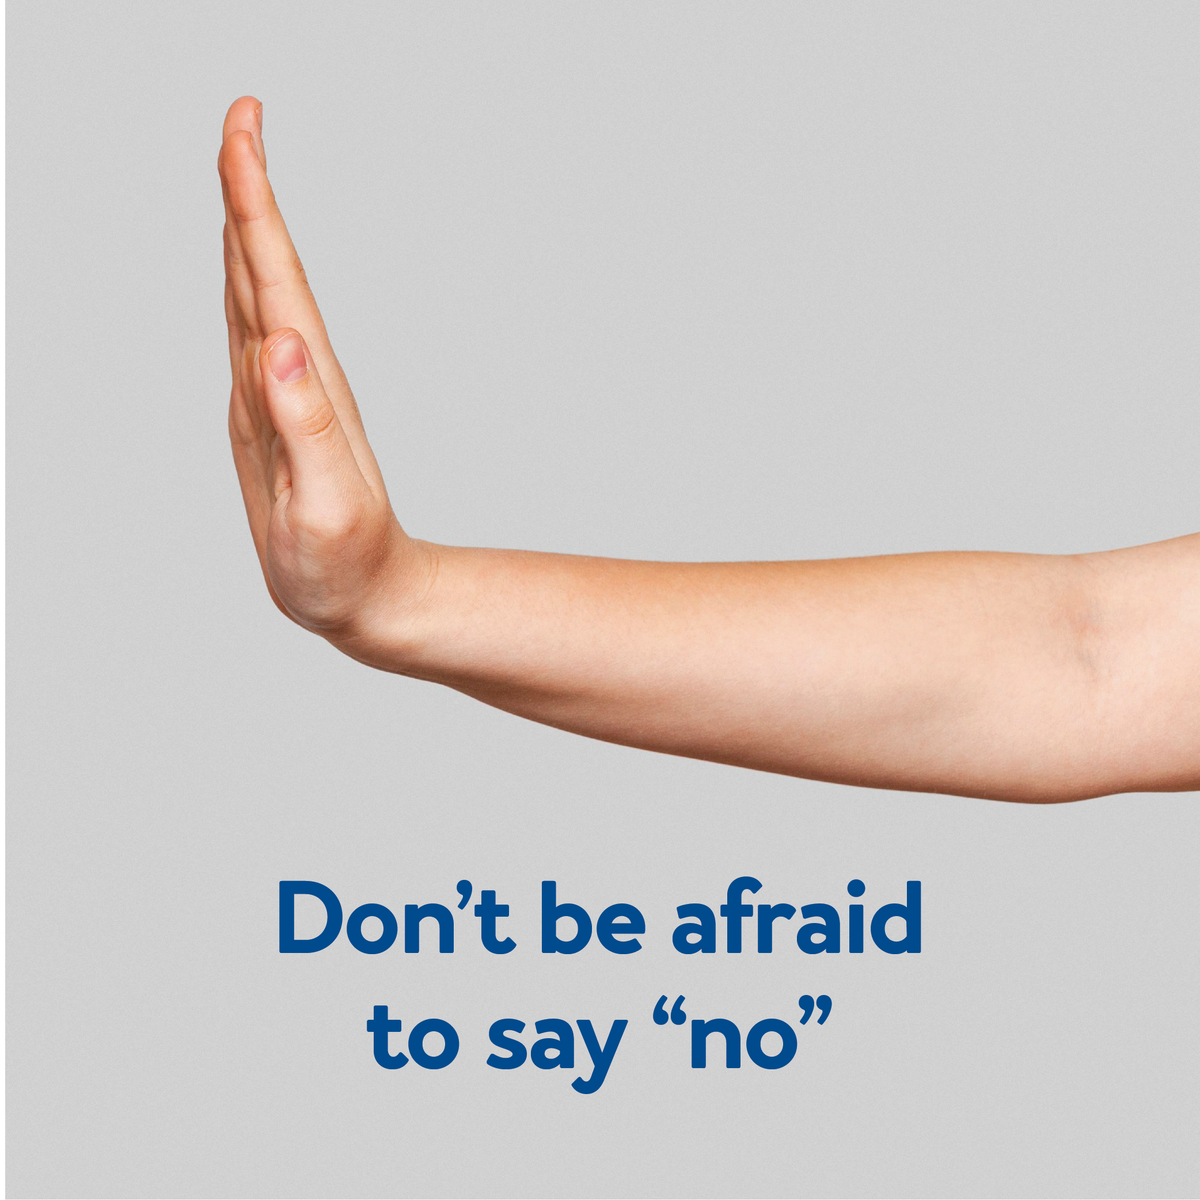 An open hand pointed out. Text, “Don’t be afraid to say no”